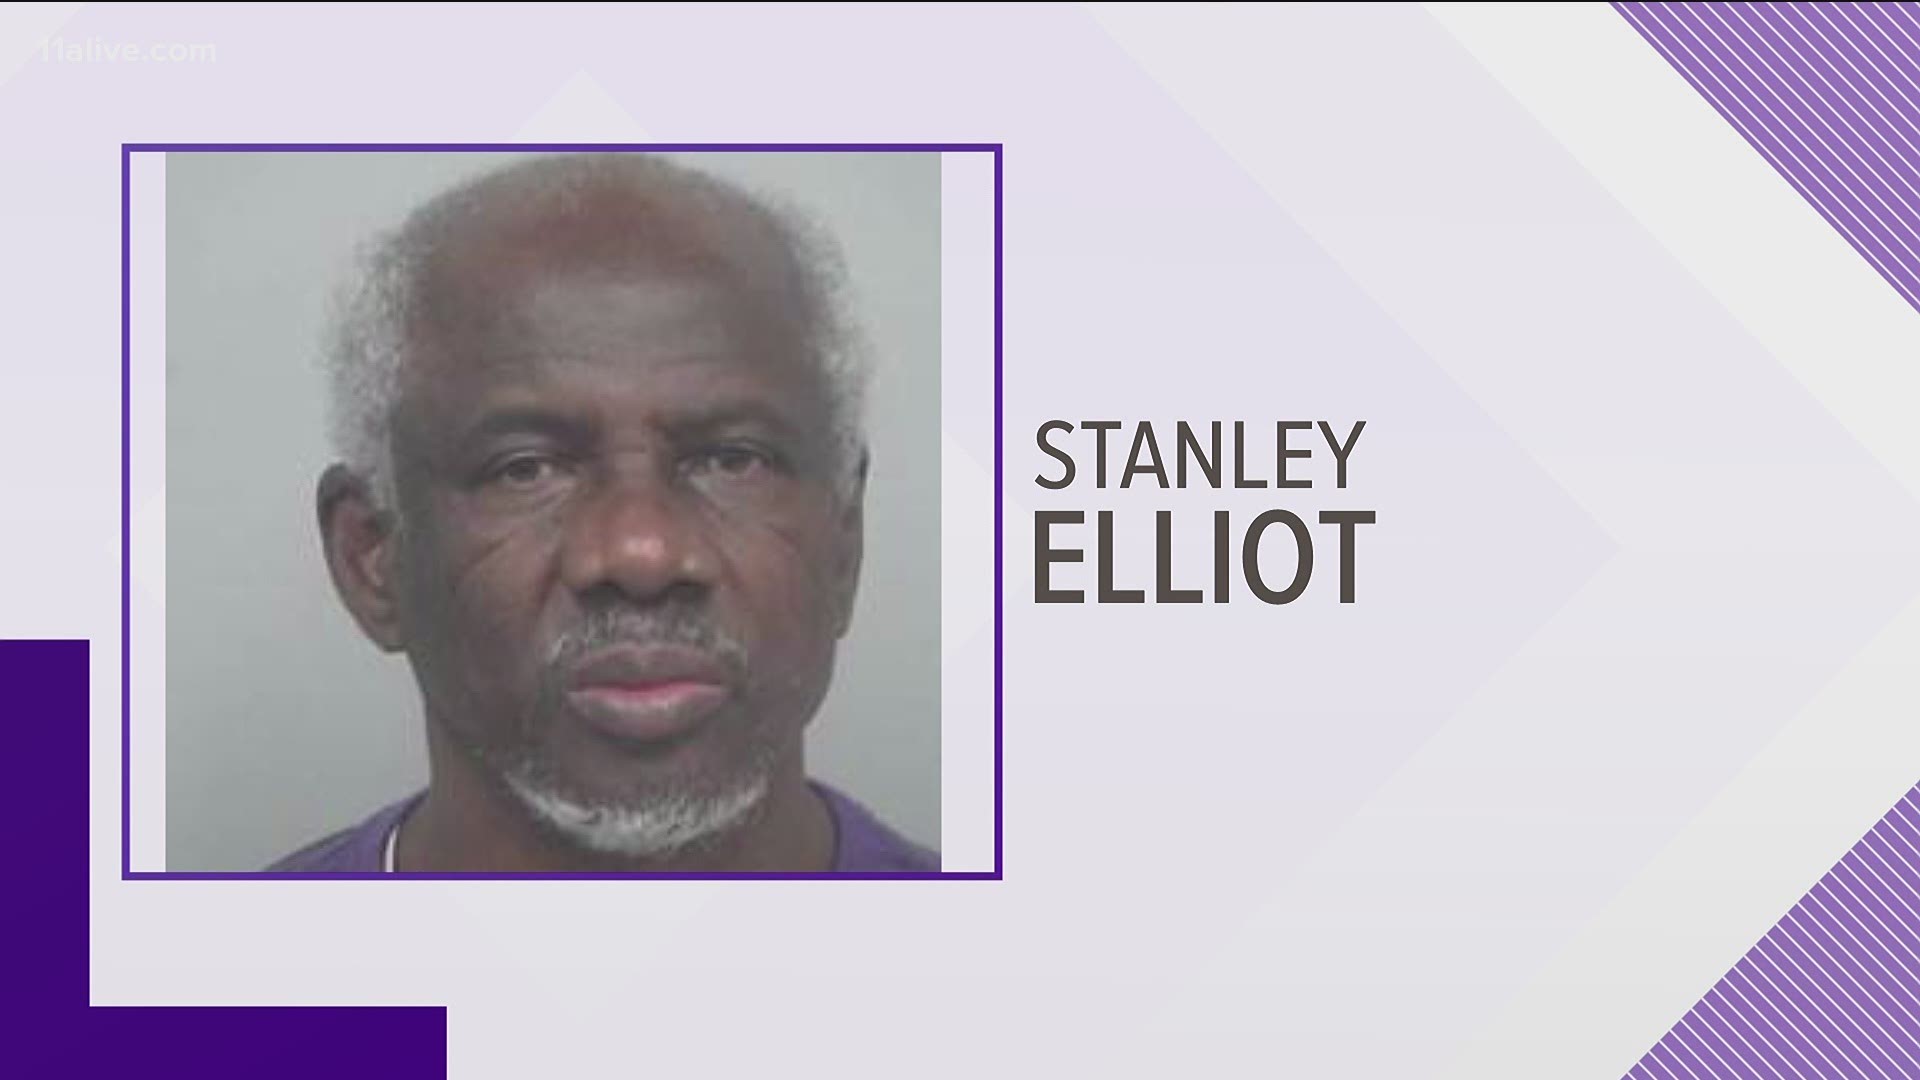 Stanley Elliot, of Lawrenceville, was arrested at his home on Friday in connection to the murder.